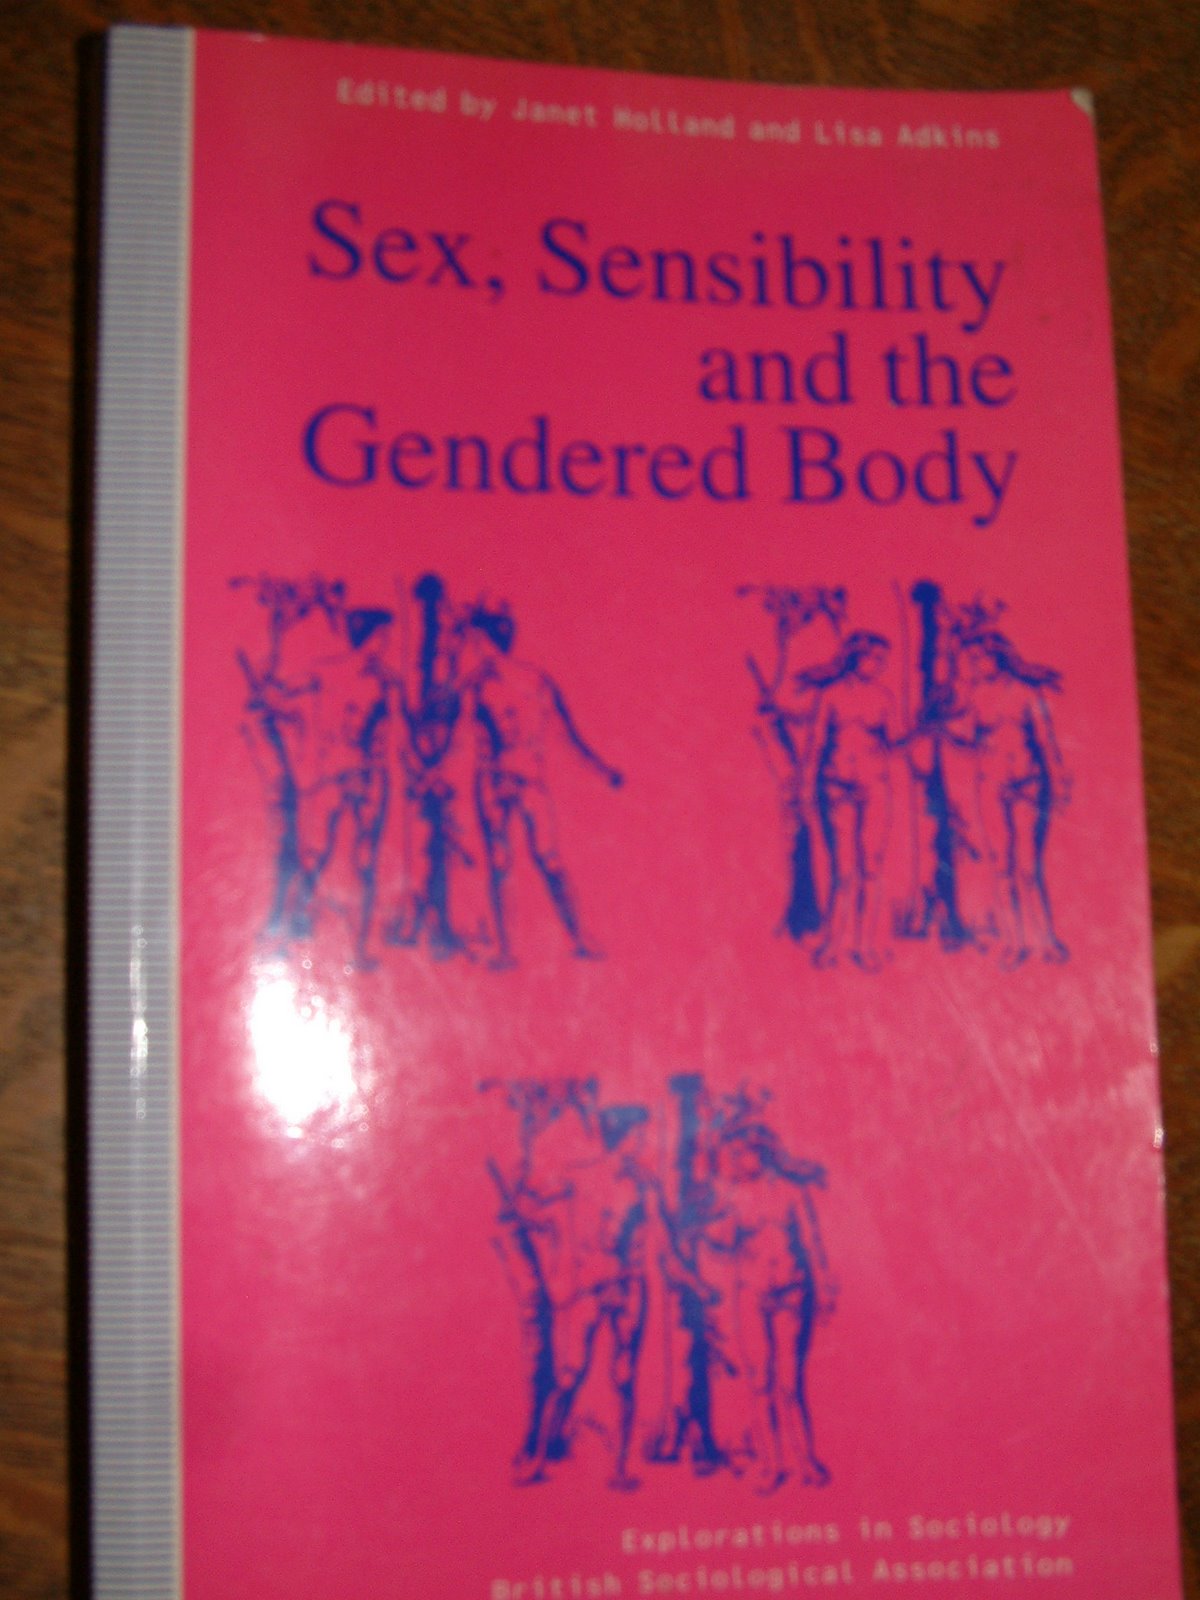 [Sex,+Sensibility+and+the+Gendered+Body.JPG]